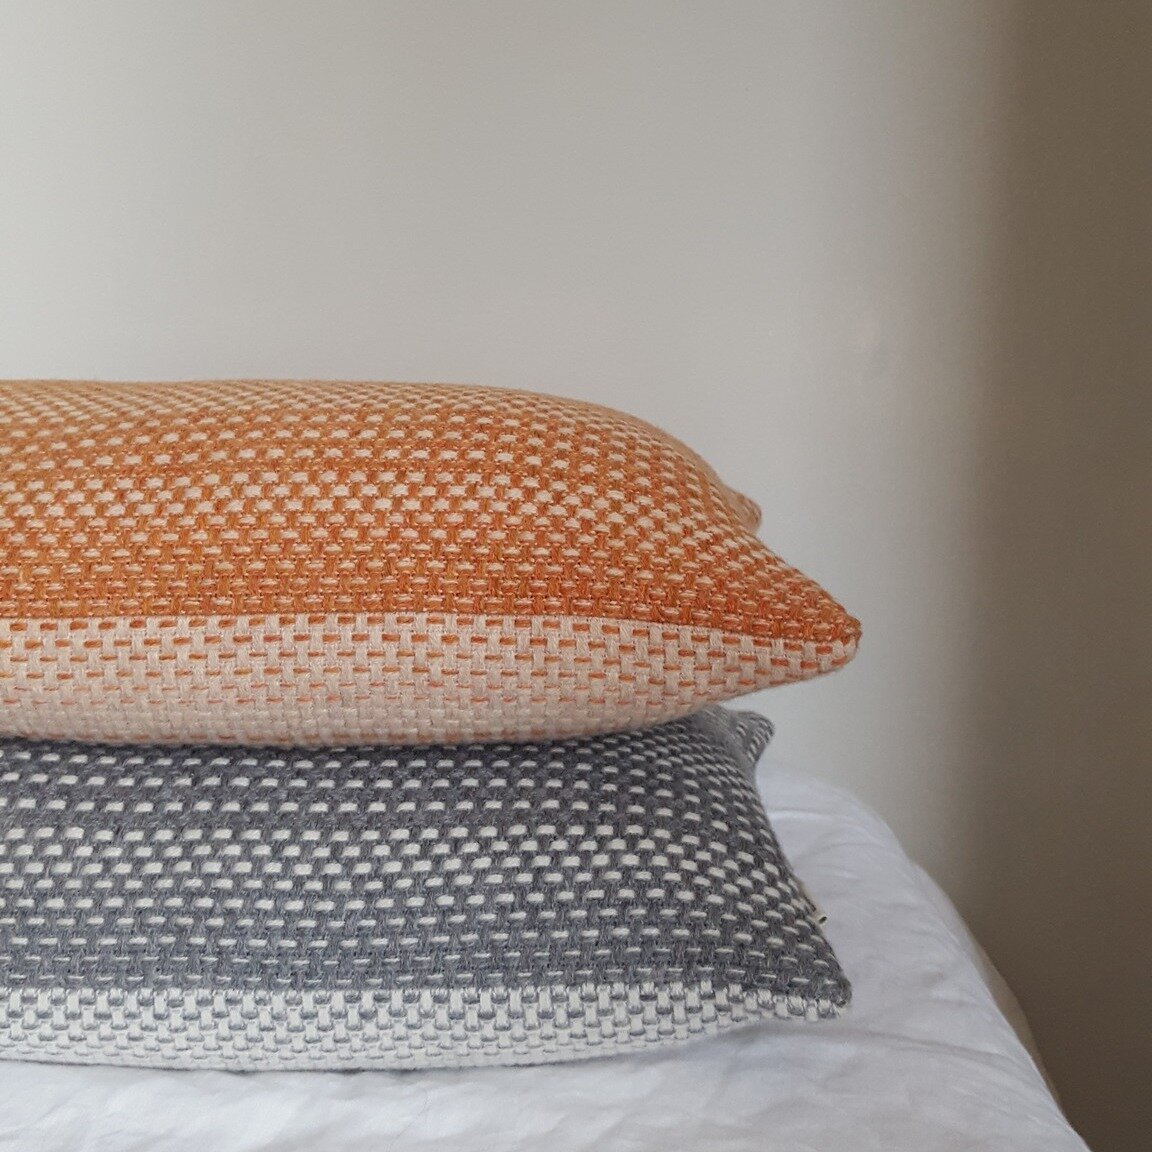 Created using wonderful natural materials...
..
The studio's Speckle bolster cushions are made from 100% merino lambs wool.  Measuring 30 cm by 50 cm.  They are perfect for adding to beds, chairs and sofas.
.
Each cushion is finished in our studio.
.